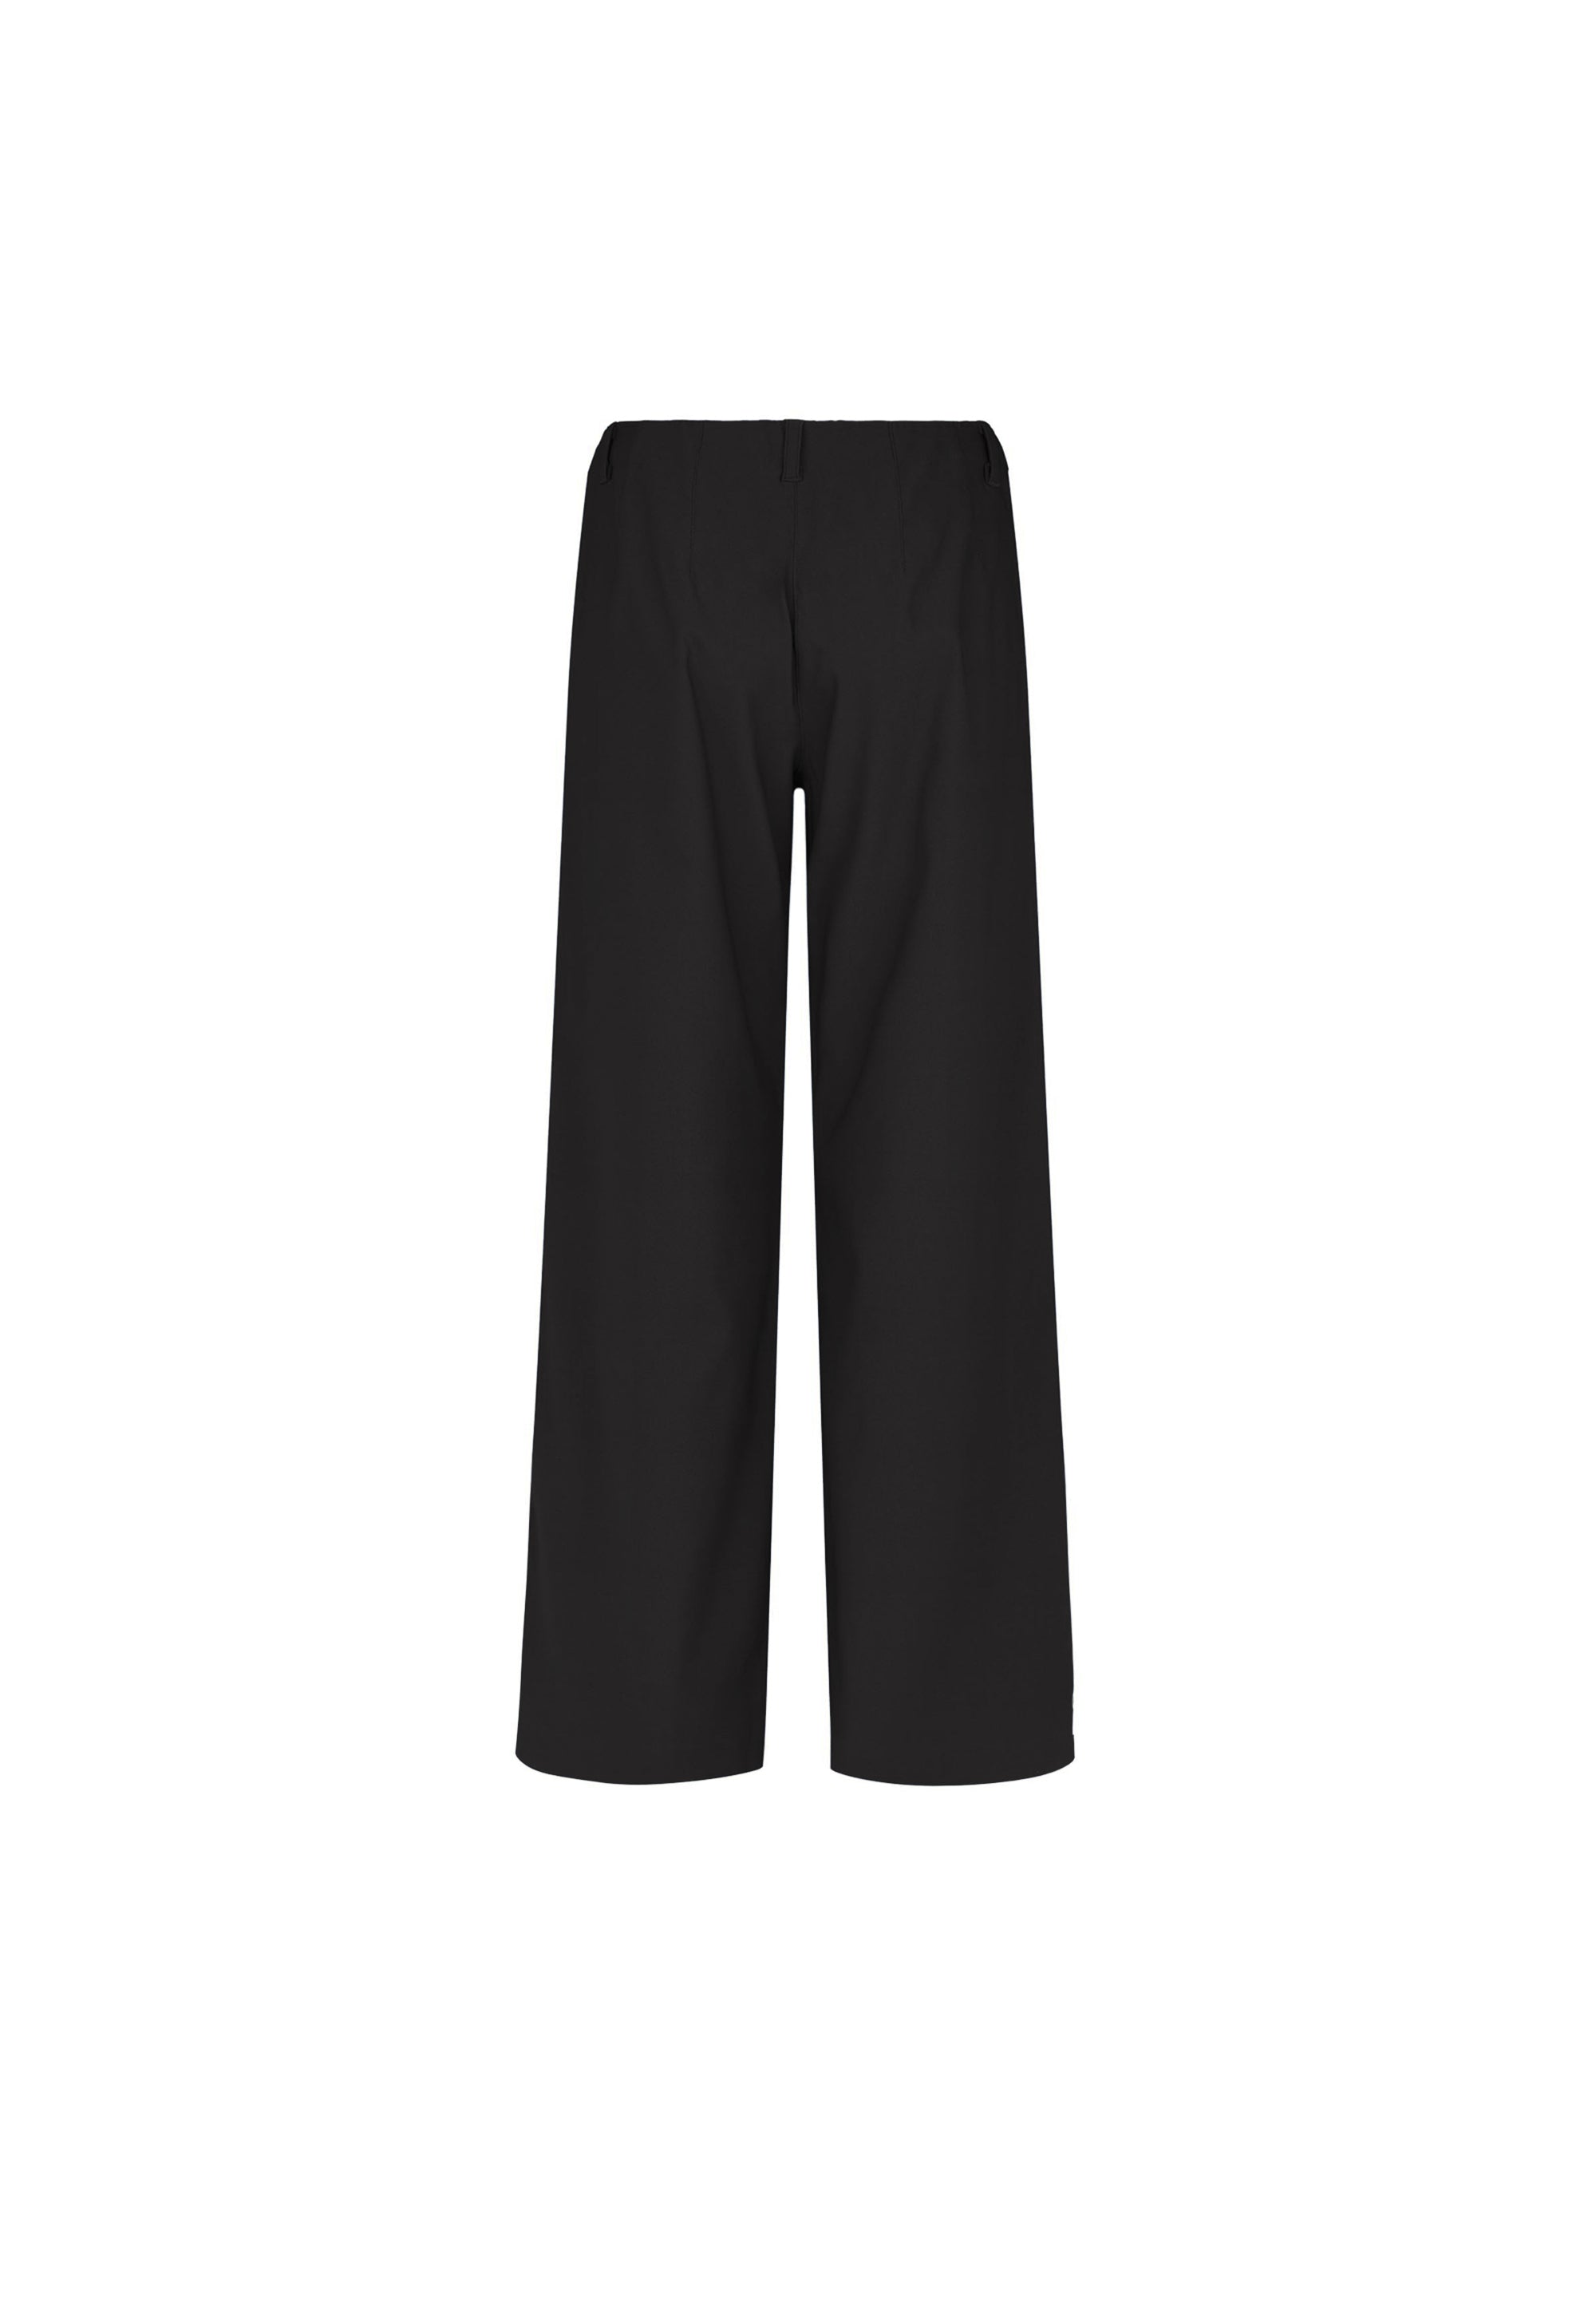 LAURIE Donna Loose - Short Length Trousers LOOSE Schwarz